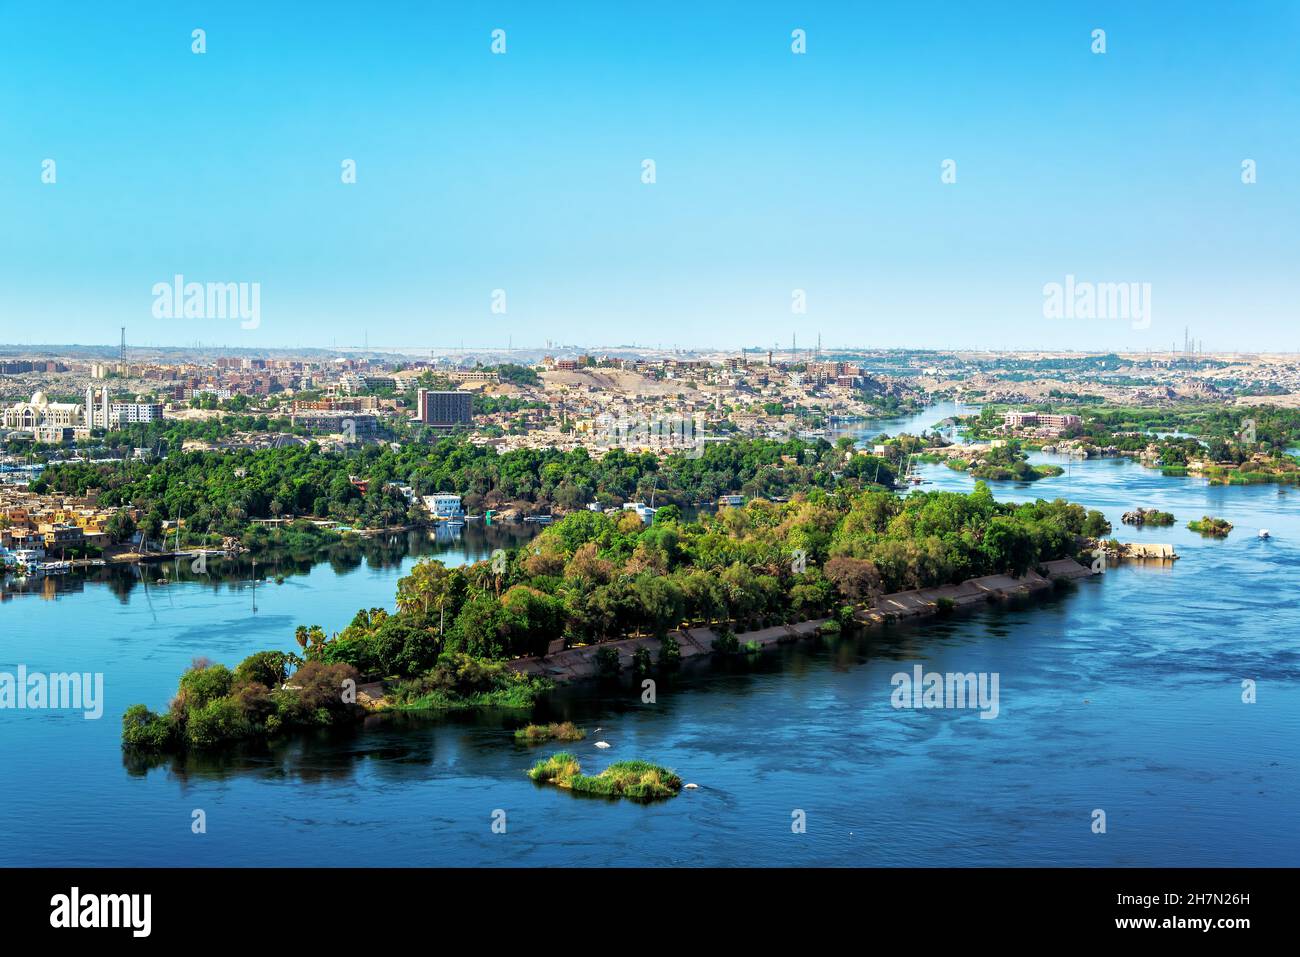 Stunning view of the Nile River with Aswan, Egypt in the background Stock Photo